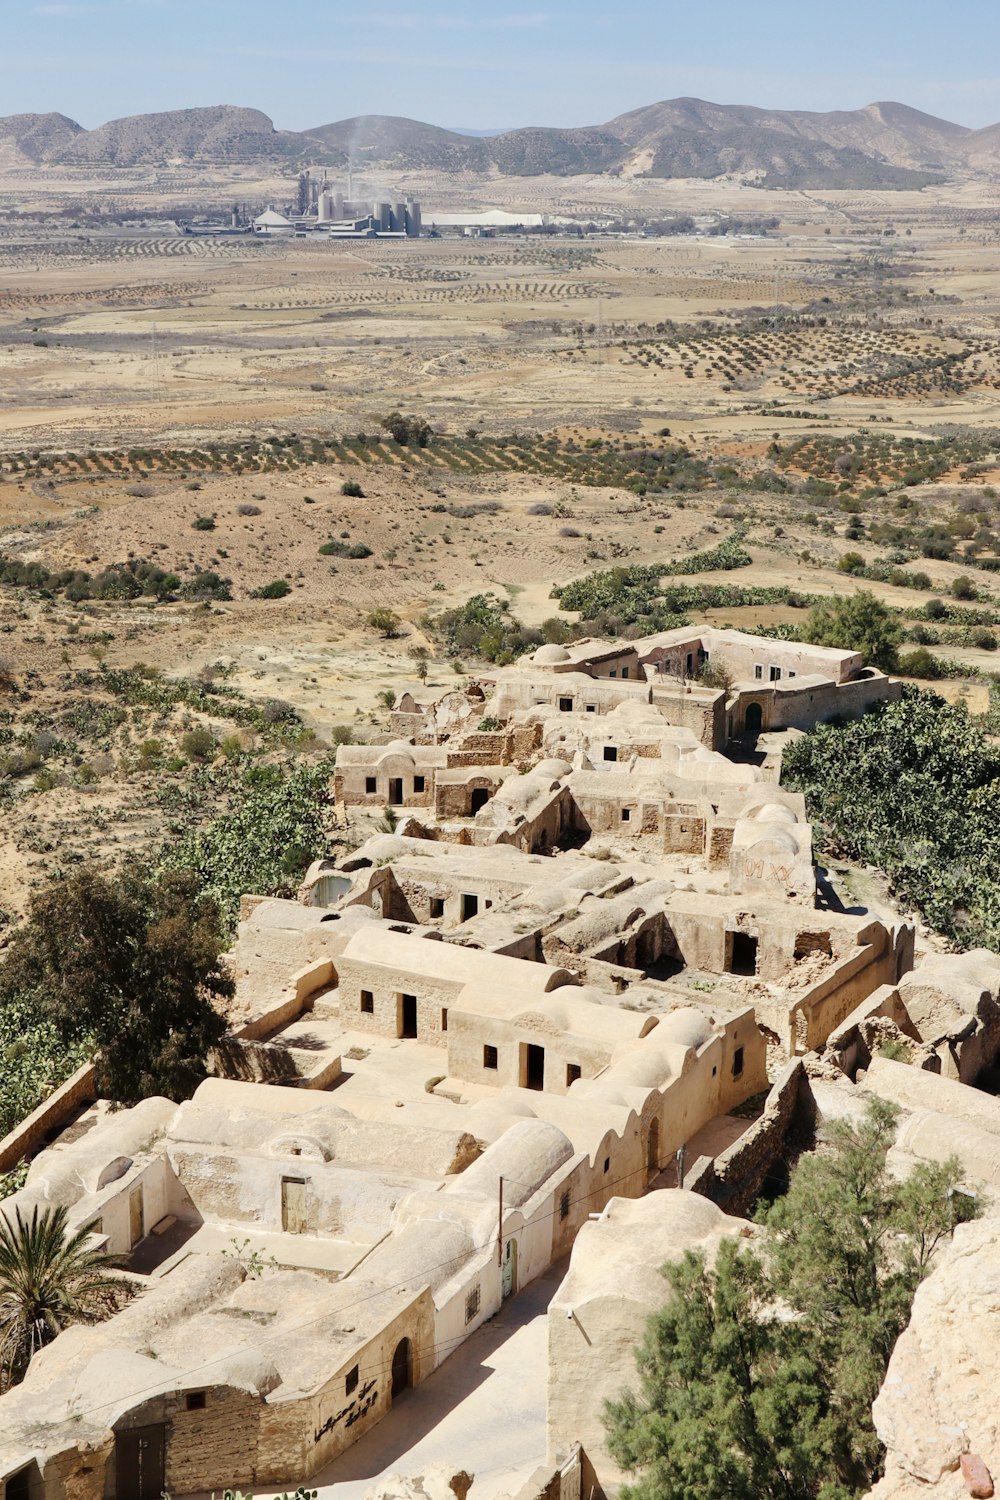 a view of a village in the middle of the desert